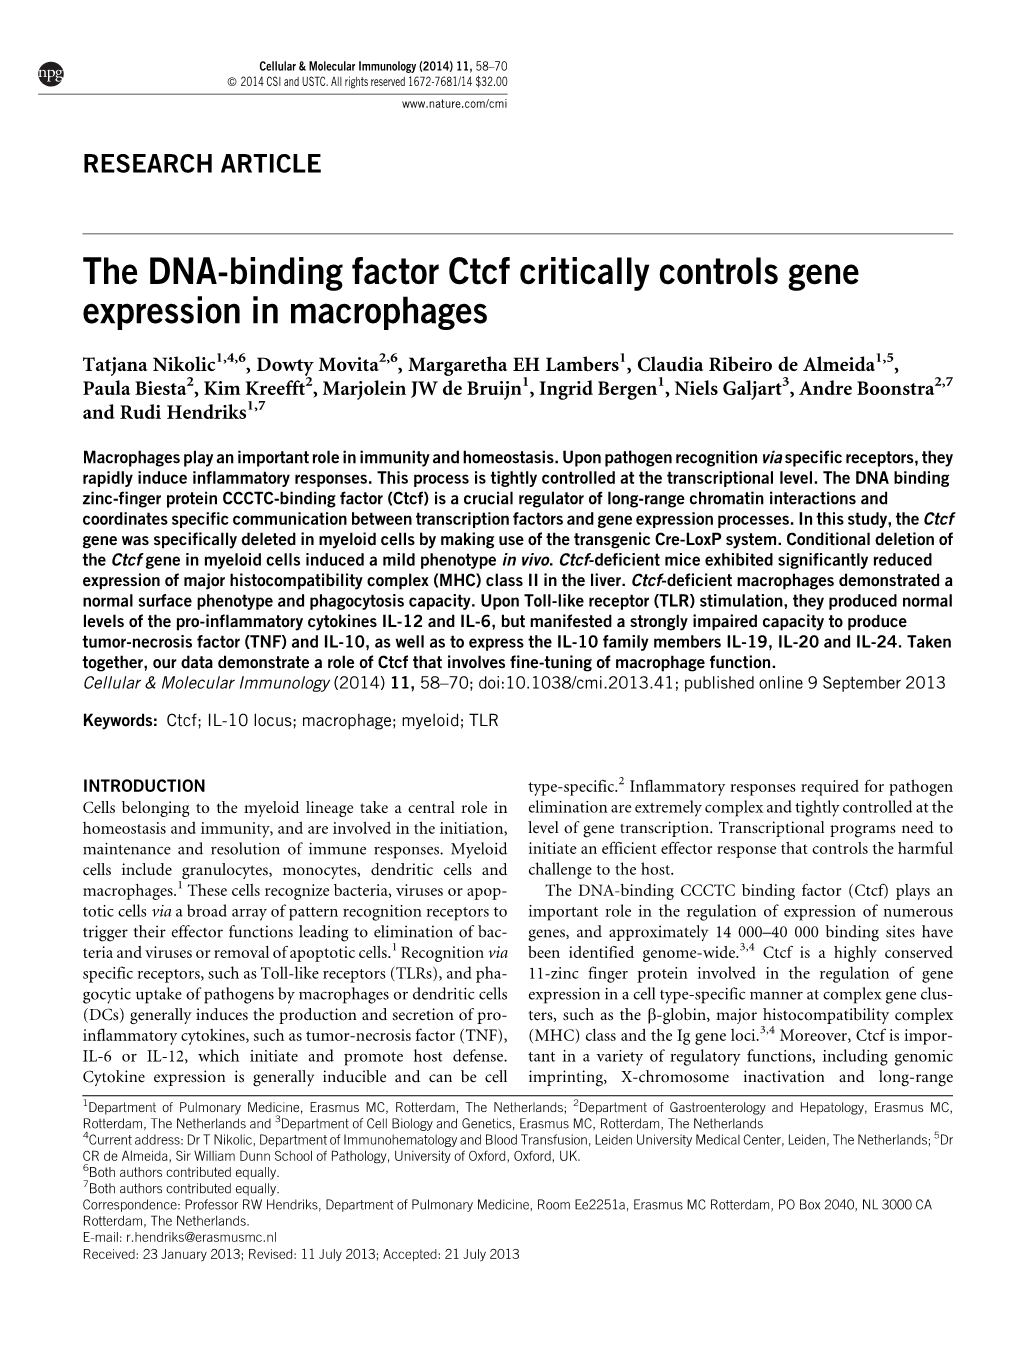 The DNA-Binding Factor Ctcf Critically Controls Gene Expression in Macrophages